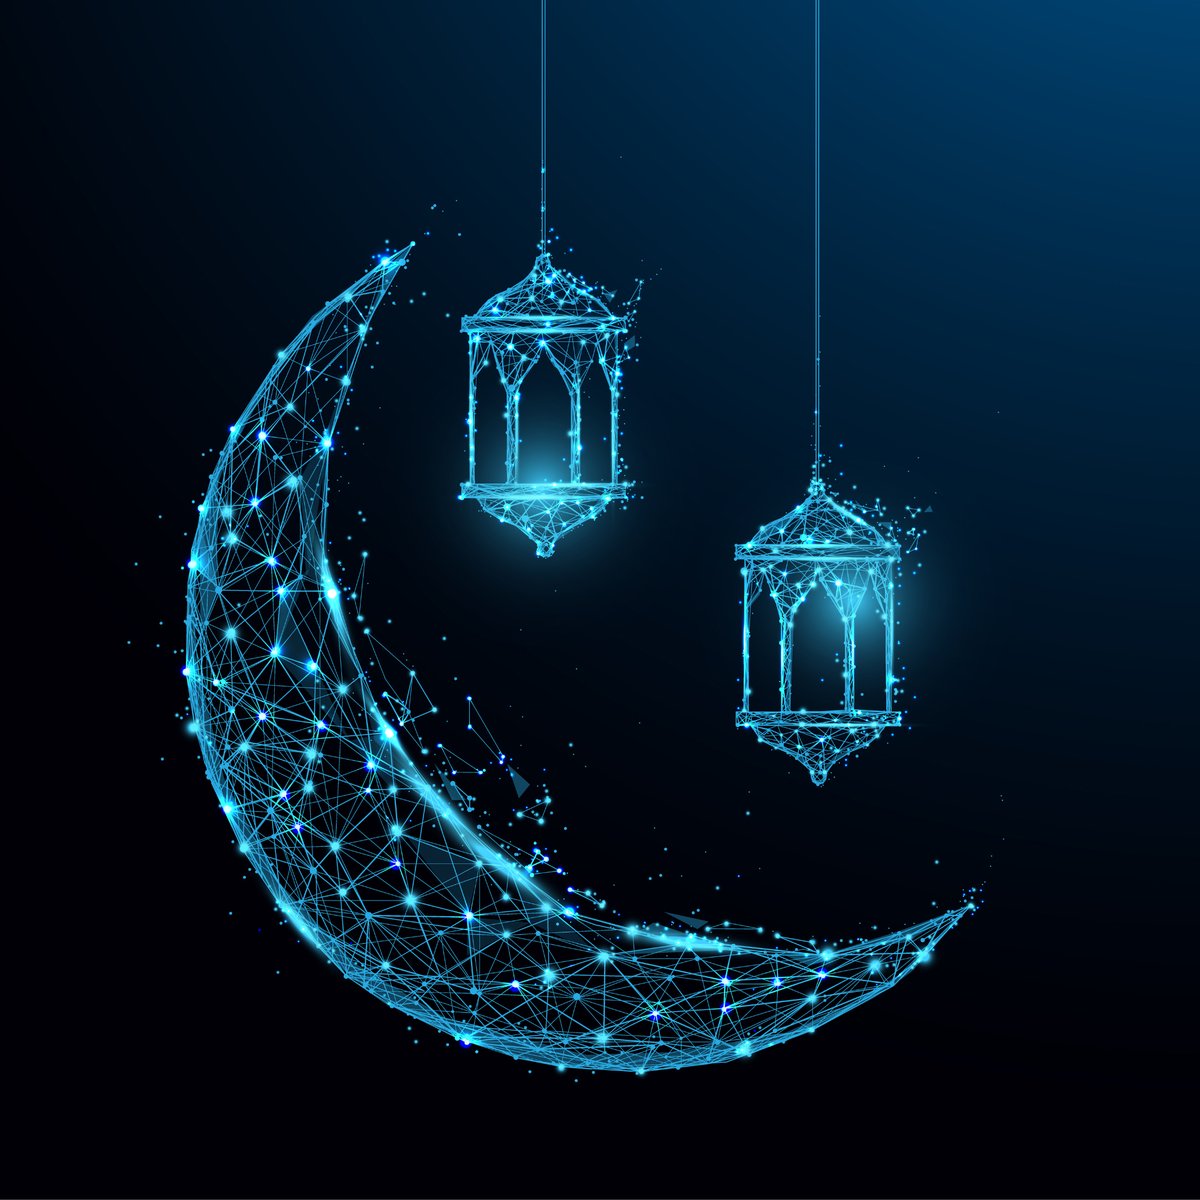 The holy month of Ramadan will start this evening, so we wanted to promote some safety messages. Follow advice at ow.ly/lSfn50QNkGK Also, we take this opportunity to wish our Muslim staff and community members a safe, peaceful and happy Ramadan #RamadanMubarak